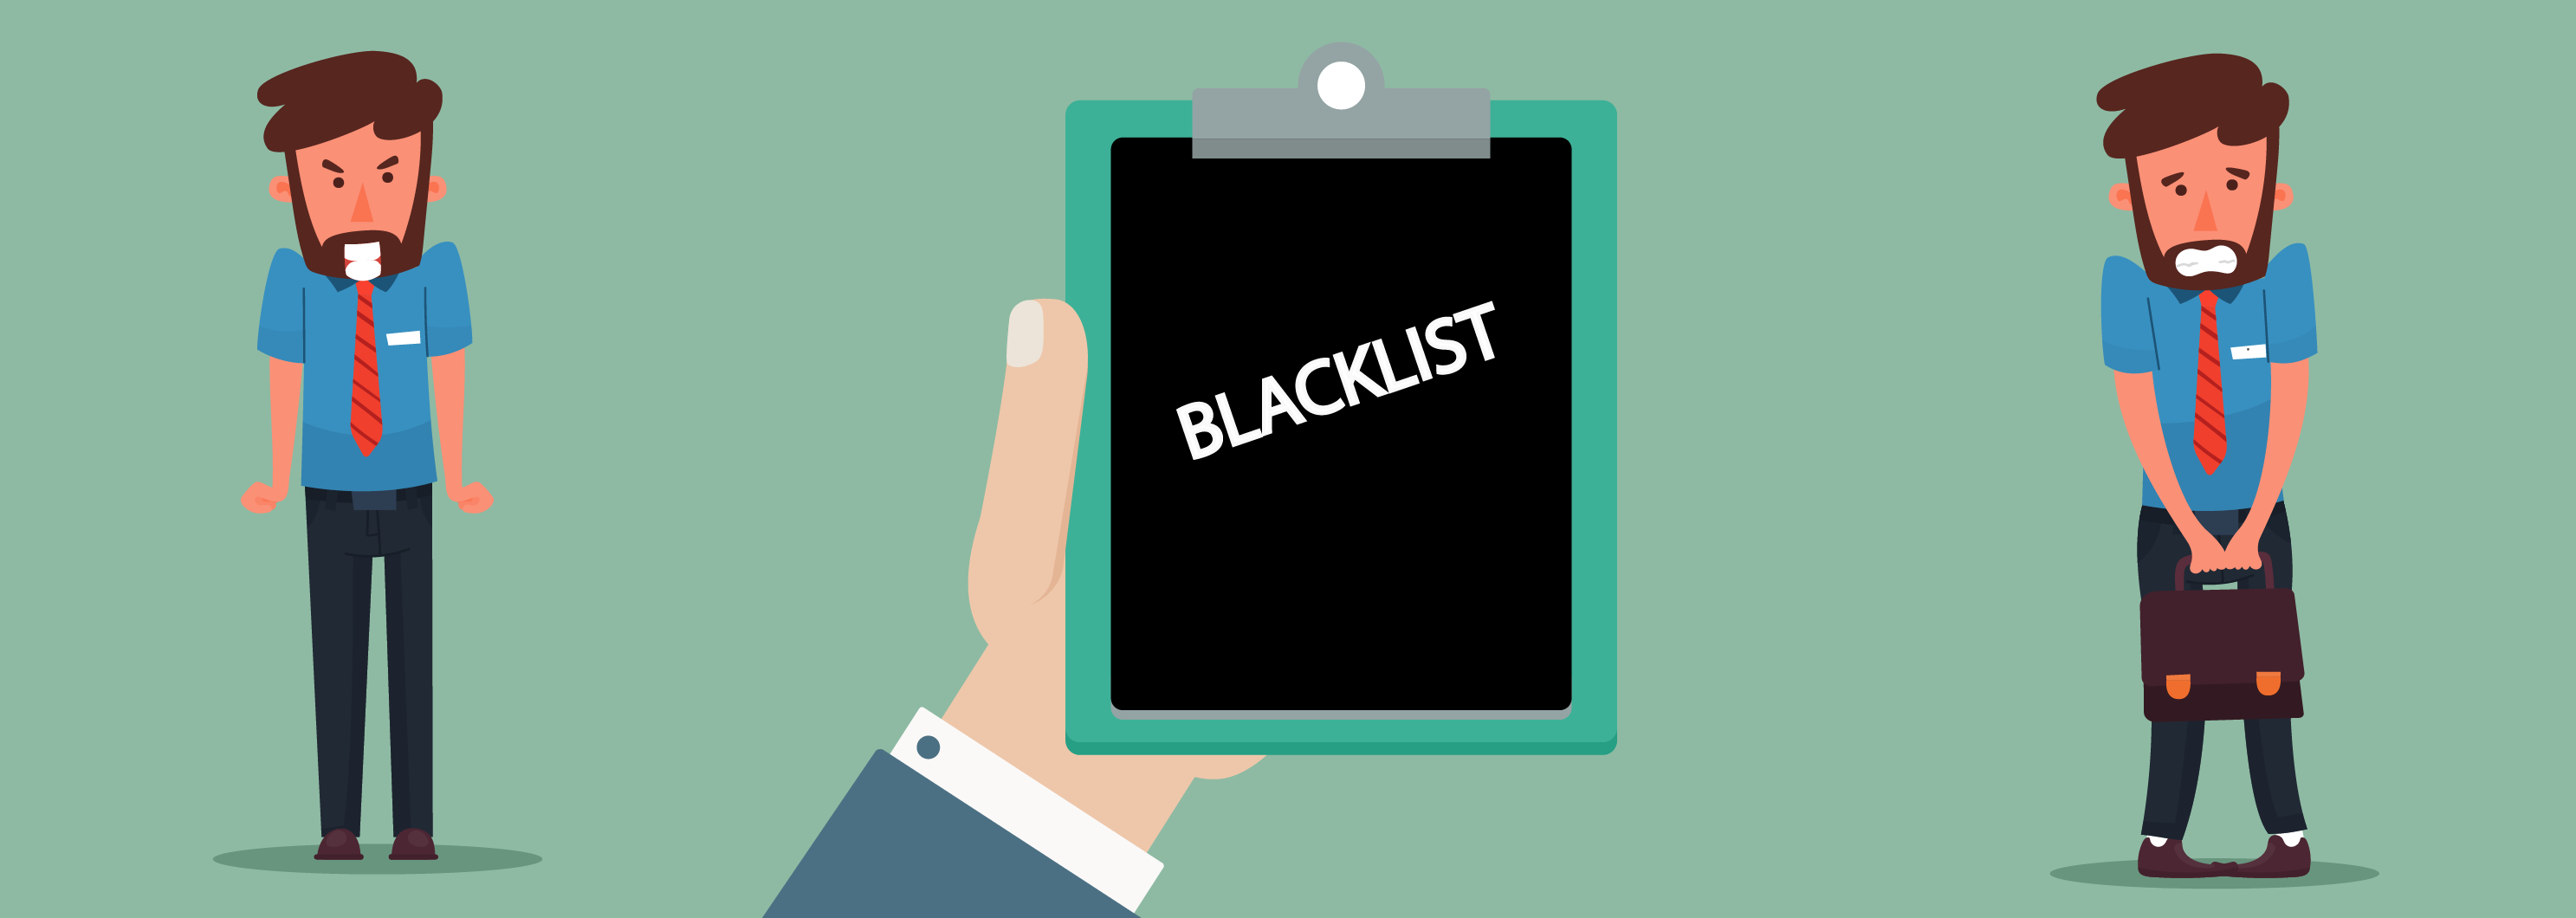 How to Check and What to Do If You're Blacklisted - Clean Email